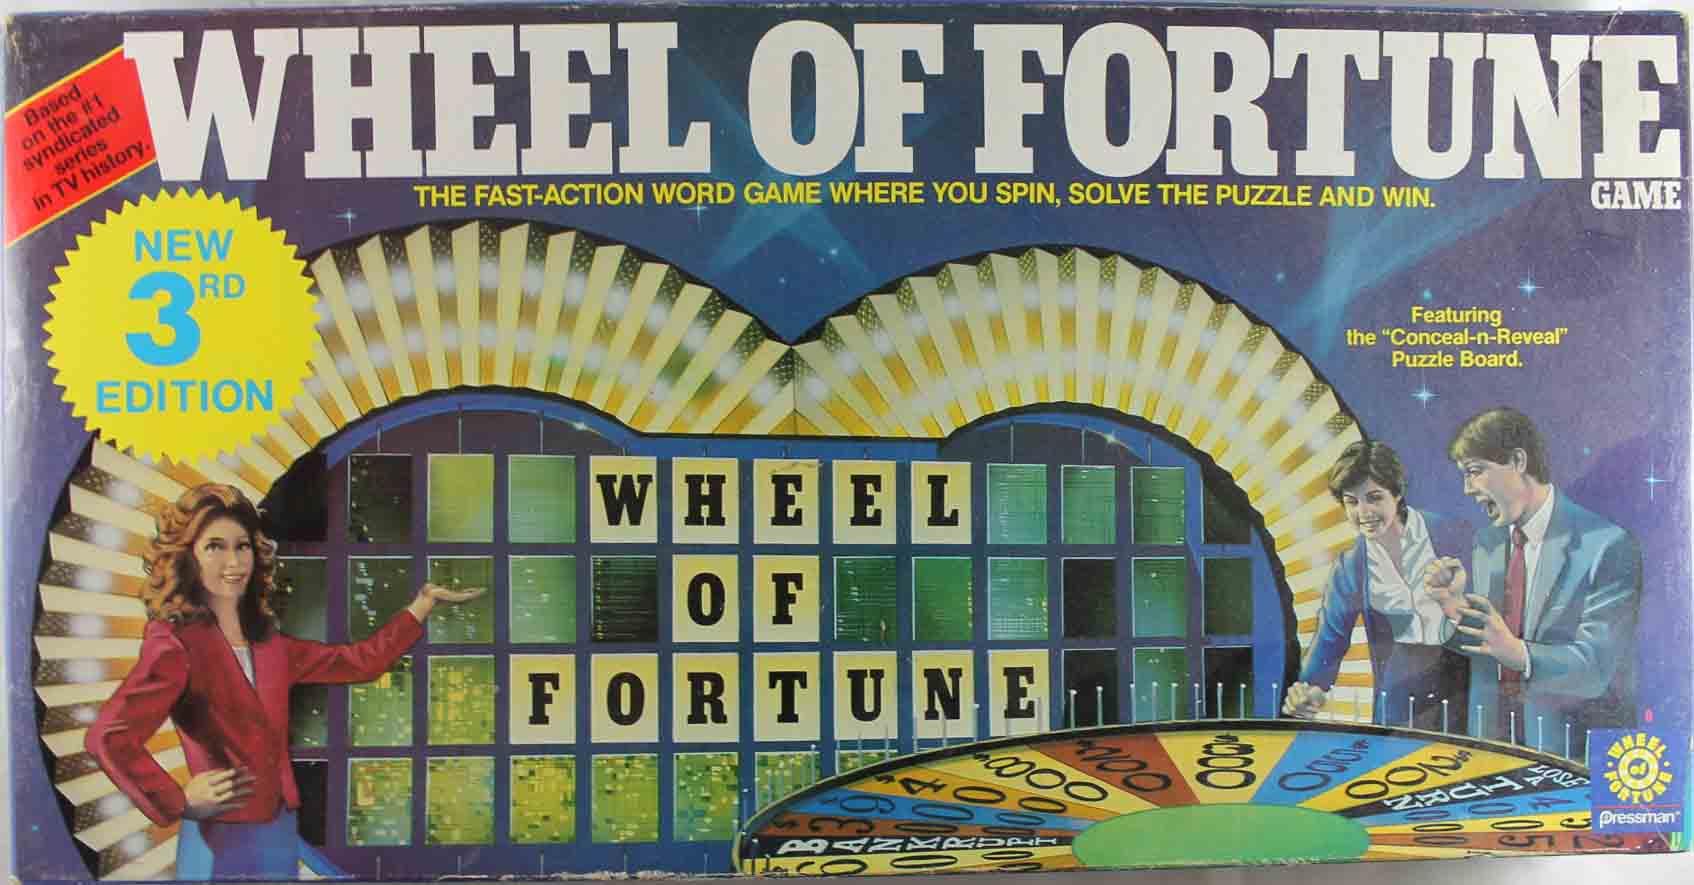 Wheel of fortune ace of base remix. Wheel of Fortune game. Интерактивная игра колесо фортуны. Wheel of Fortune mobile game. Wheel of Fortune Handmade.